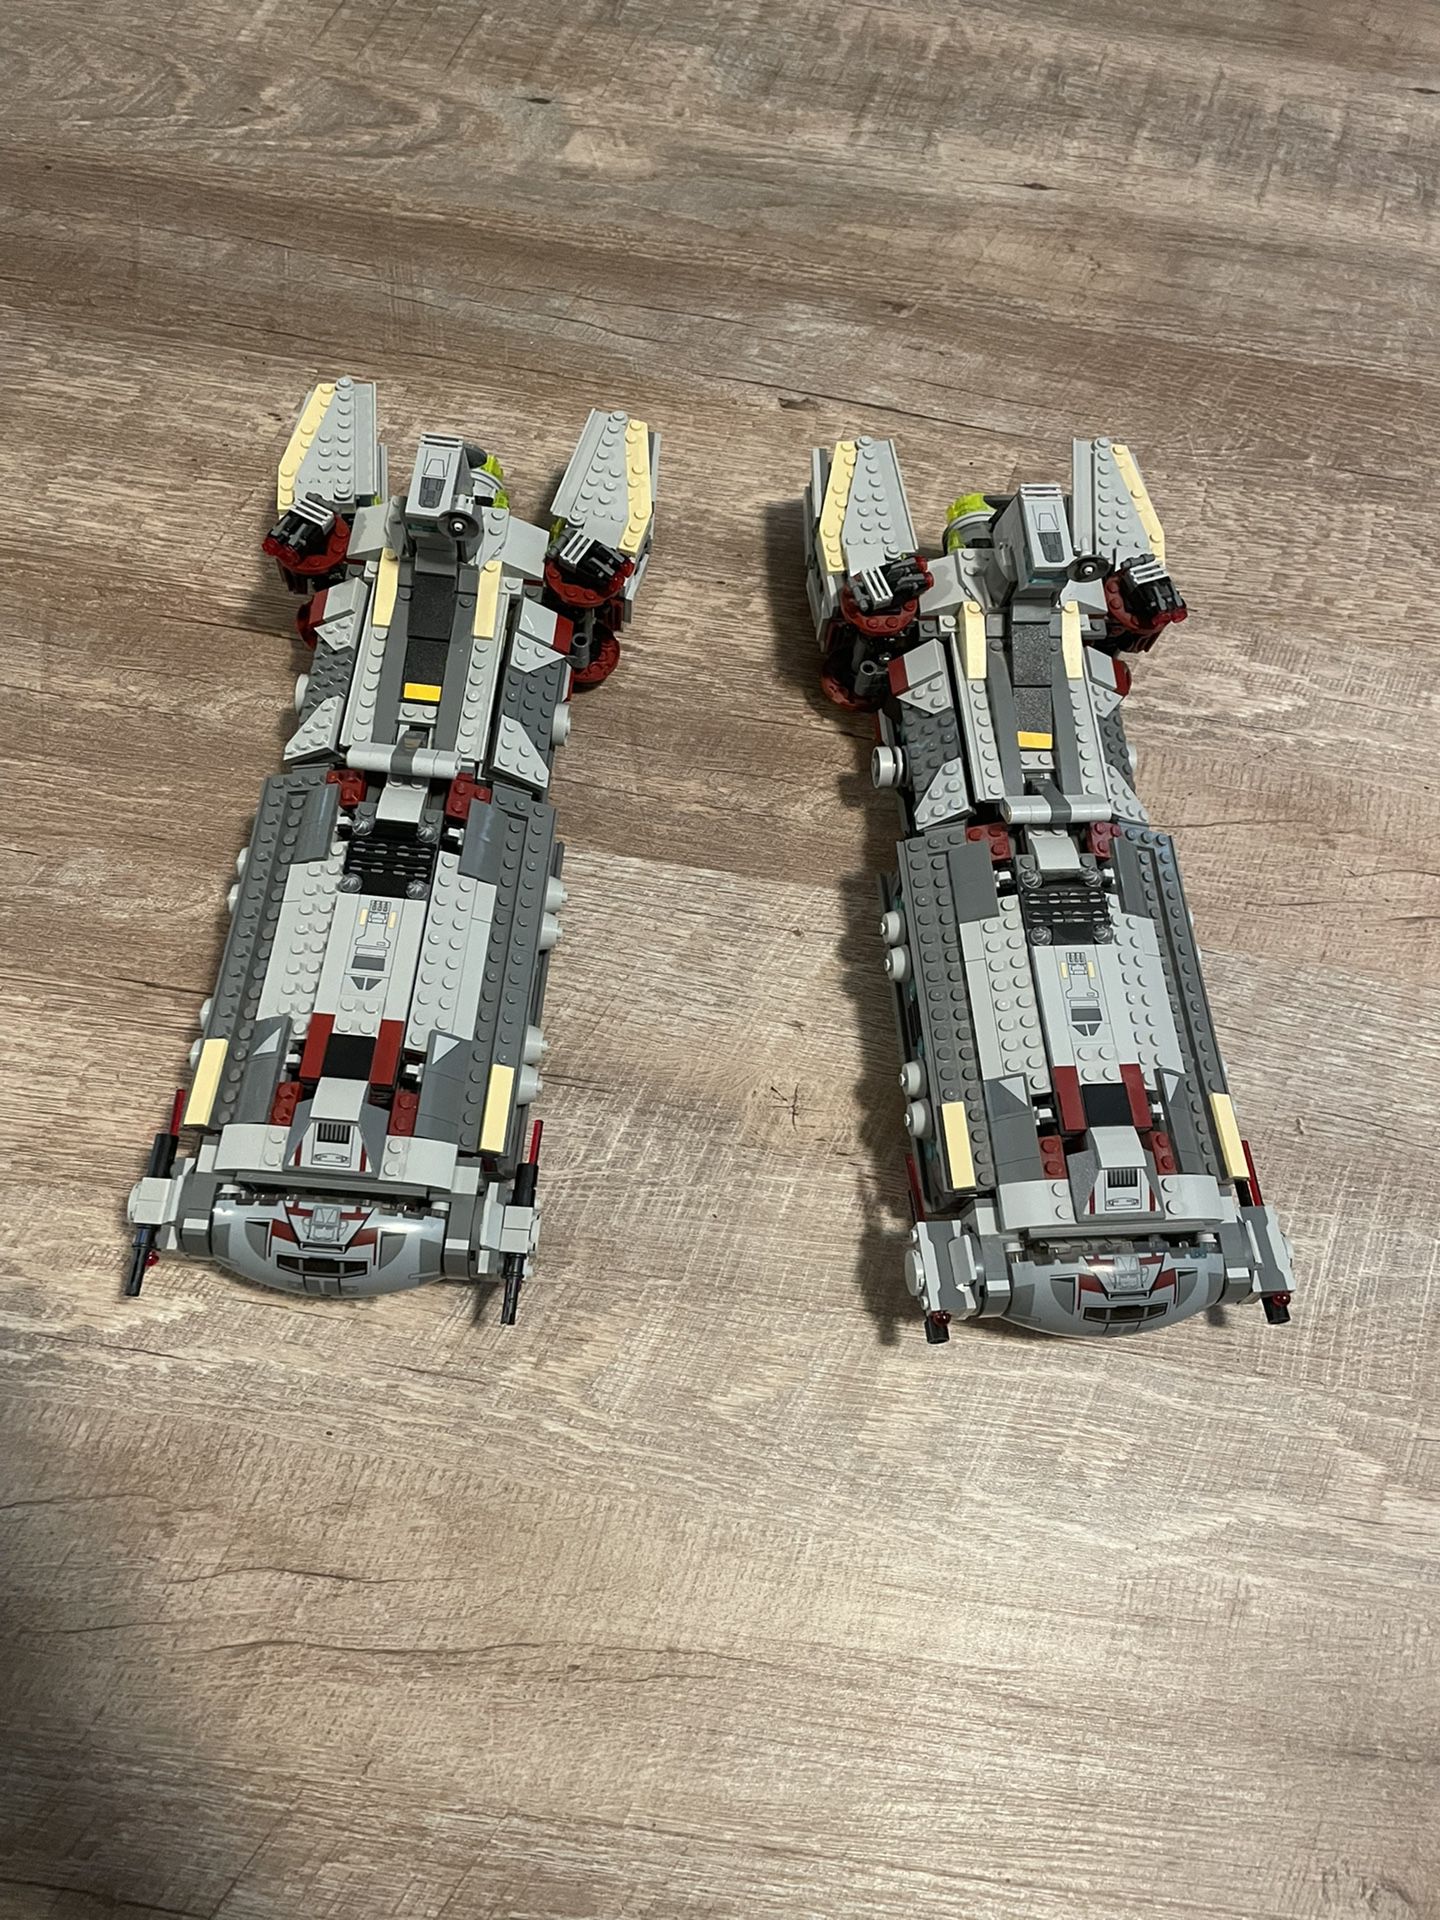 2x Lego Wars Rebels Combat Frigate 75158 (Ship Only) for in Beaverton, OR - OfferUp